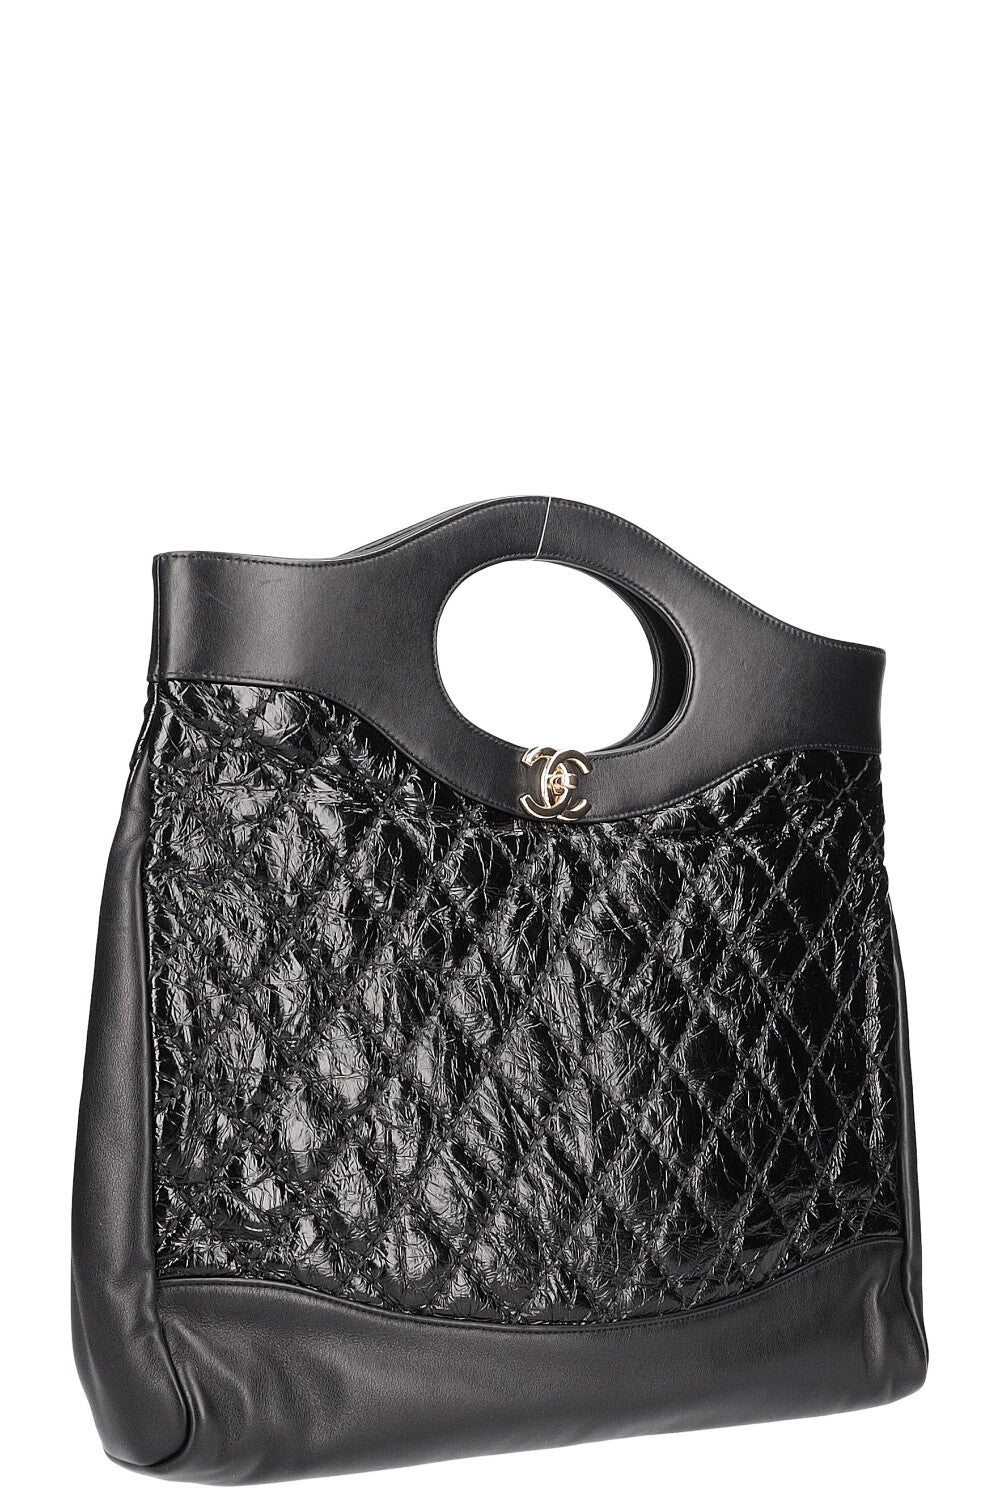 CHANEL 31 Shopping Bag Quilted Calfskin Black